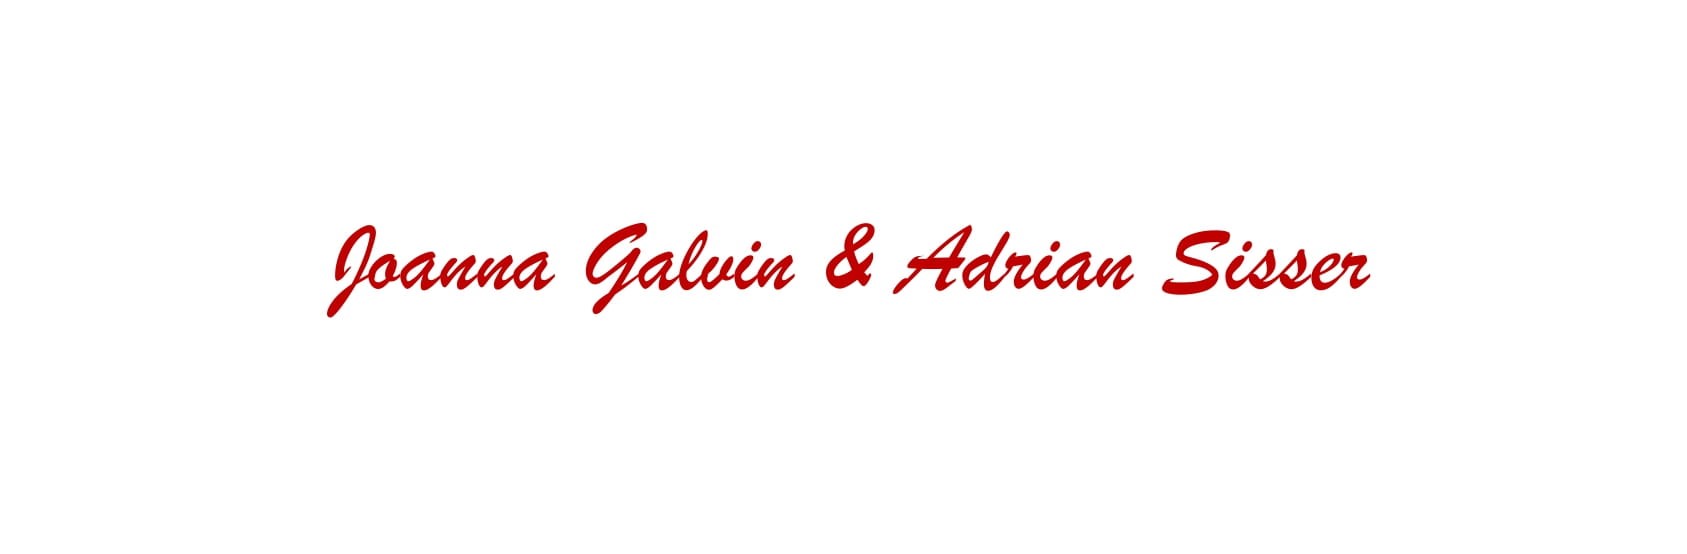 Joanna Galvin and Adrian Sisser